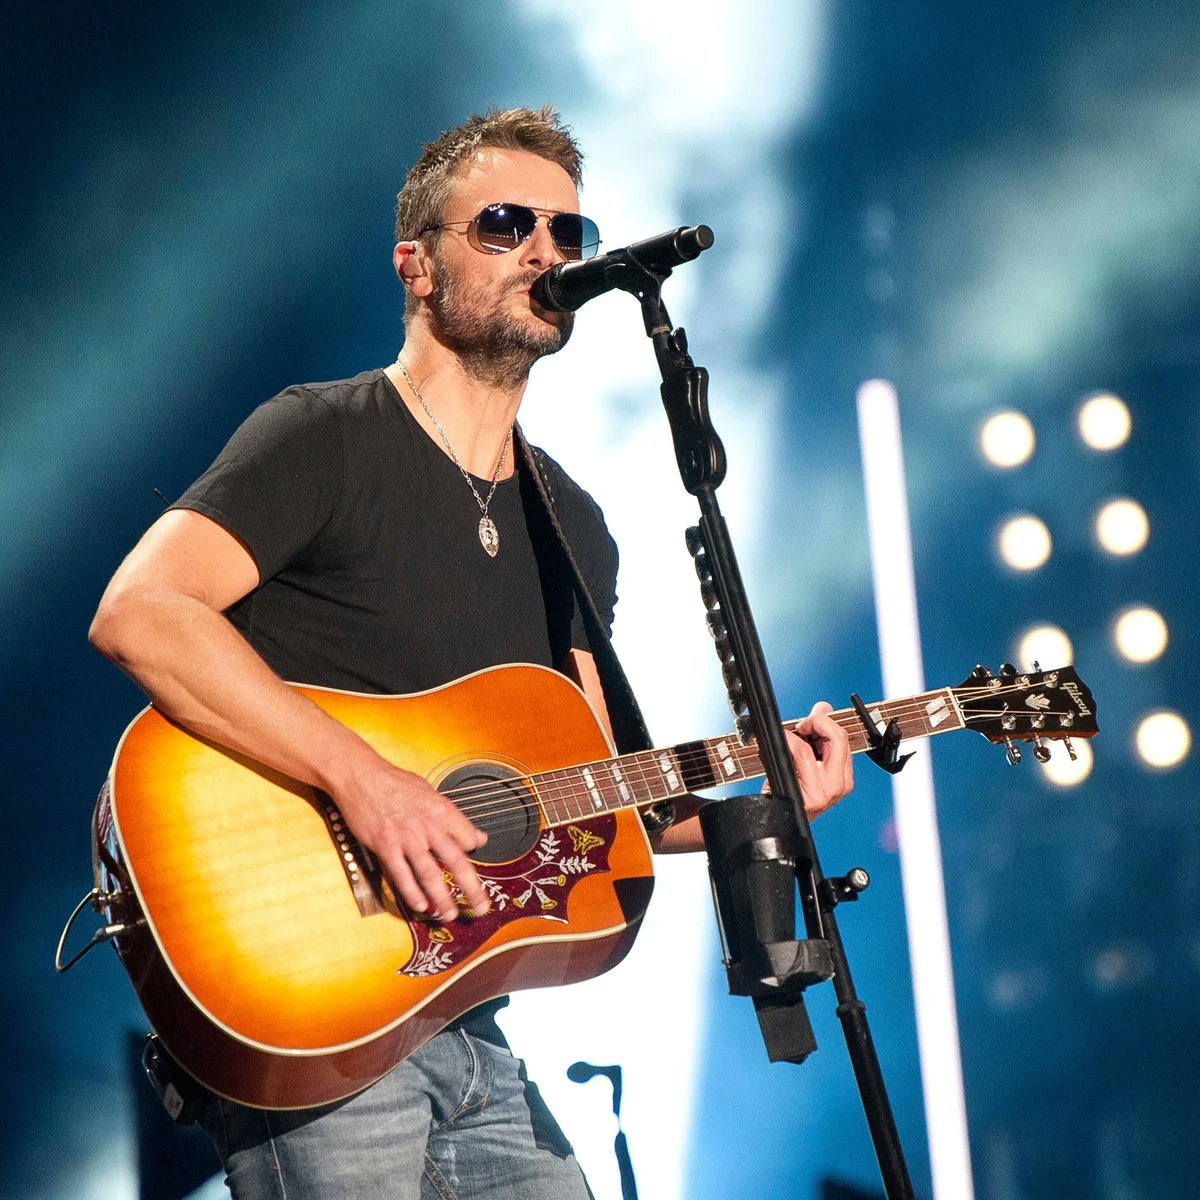 If anyone was to guess what @ericchurch was planning to bring to the @Stagecoach spotlight Friday night, it likely wouldn't have involved a full gospel choir and hip-hop covers. However, that's exactly what the star brought to the stage 👀 READ MORE: holler.country/news/breaking/…